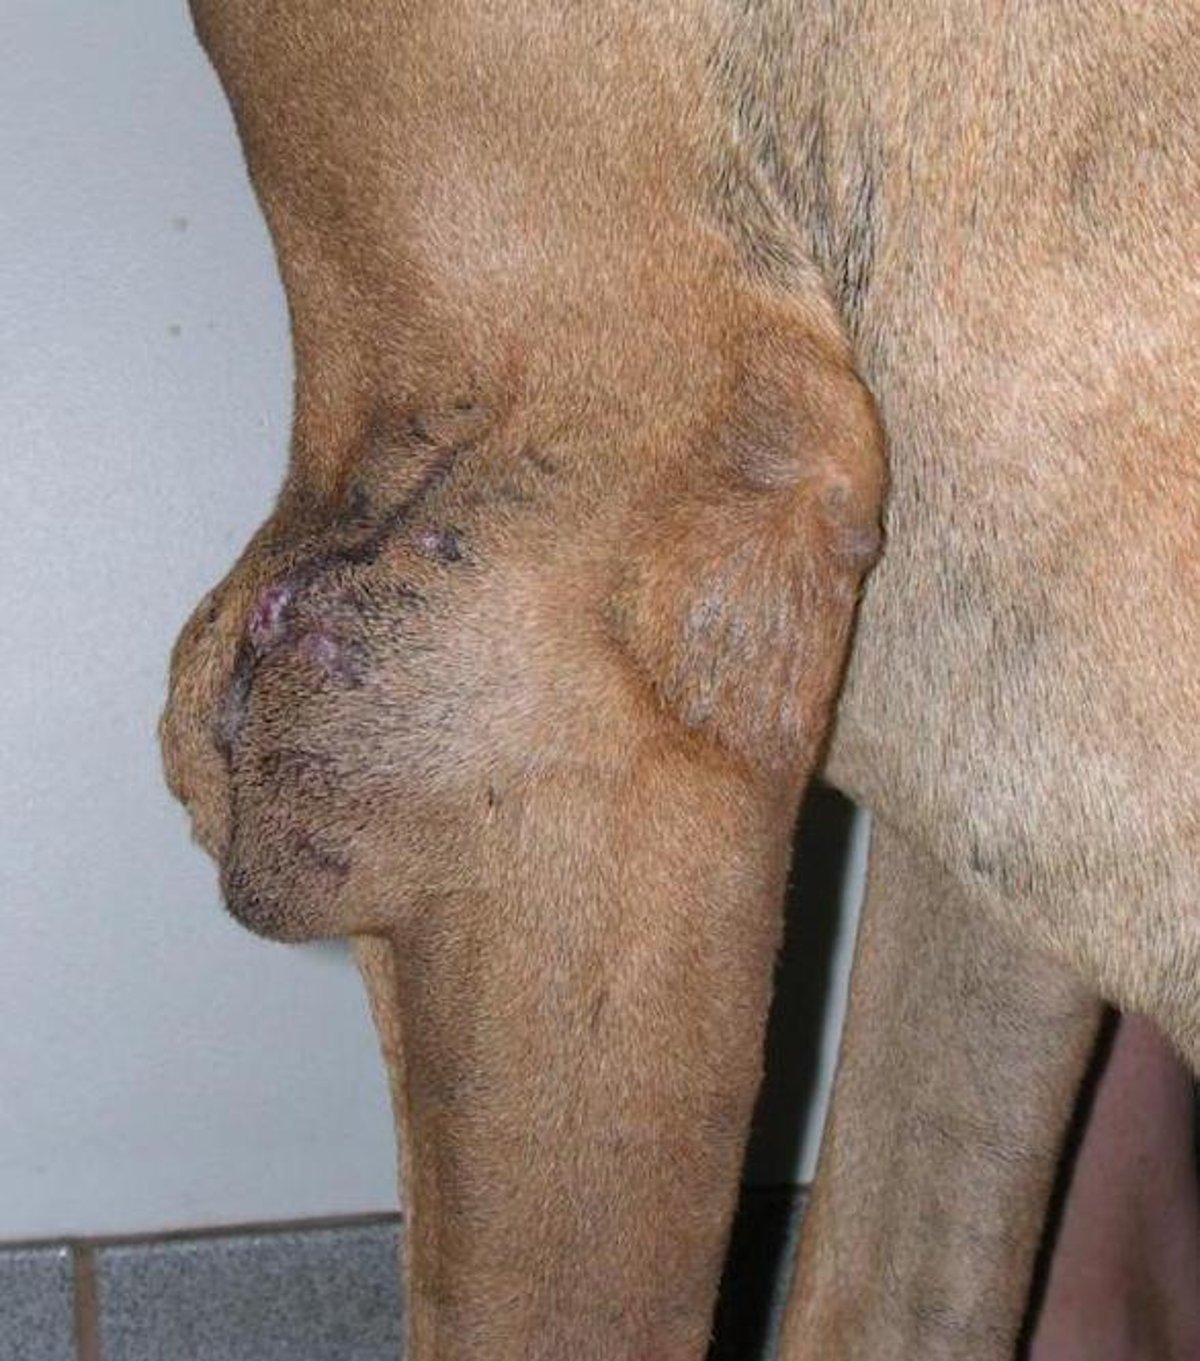 Peripheral nerve sheath tumor recurrence, left elbow, Great Dane mix